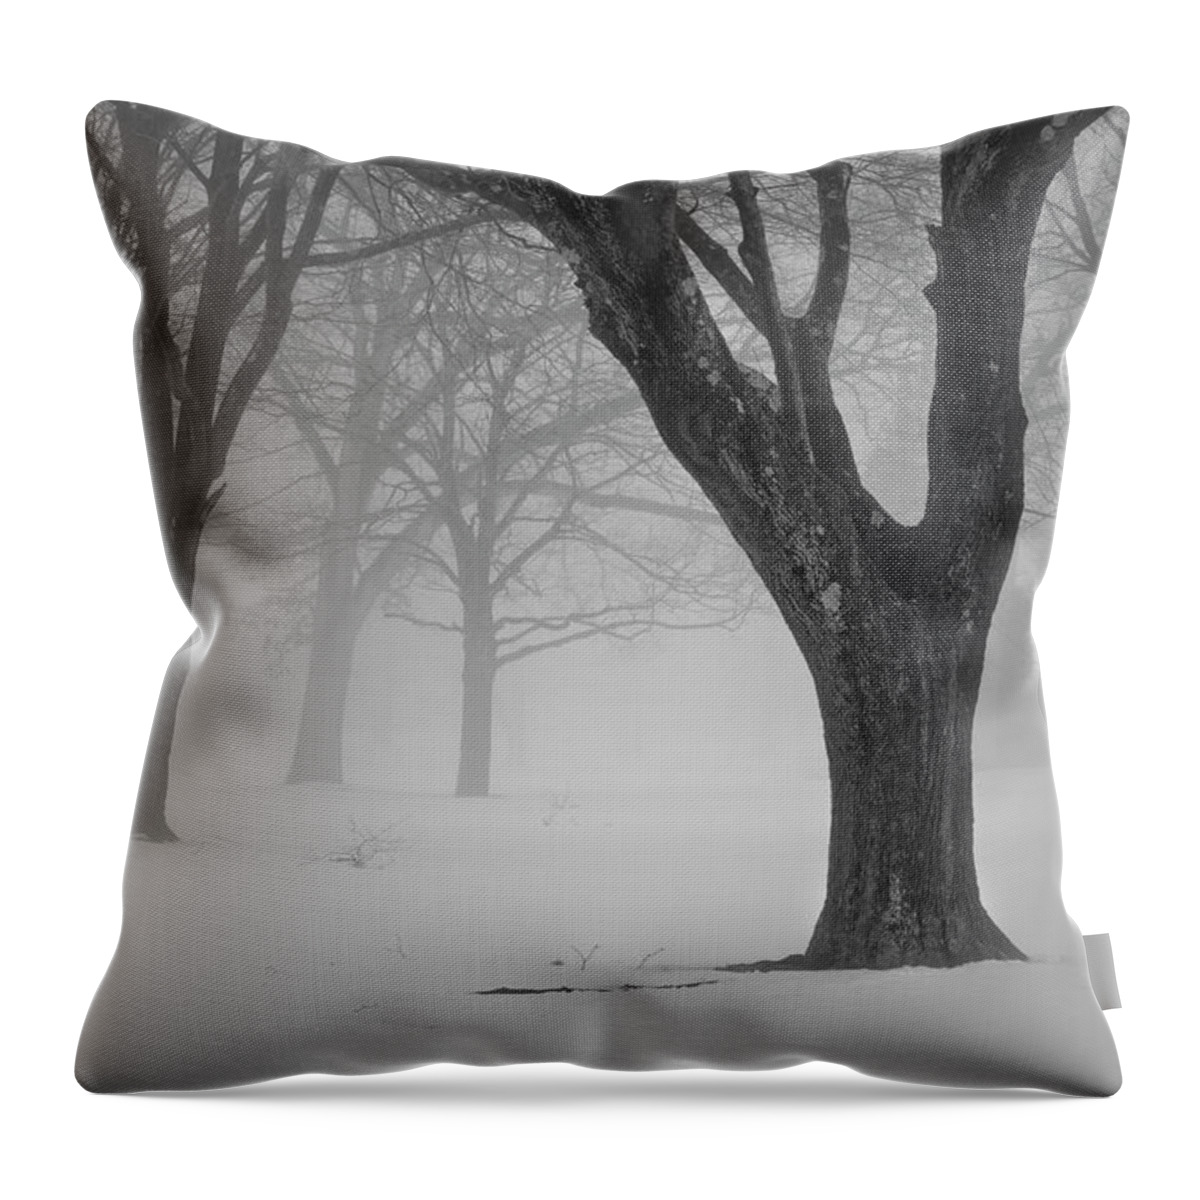 Landscape Throw Pillow featuring the photograph Winter Landscape V by David Gordon